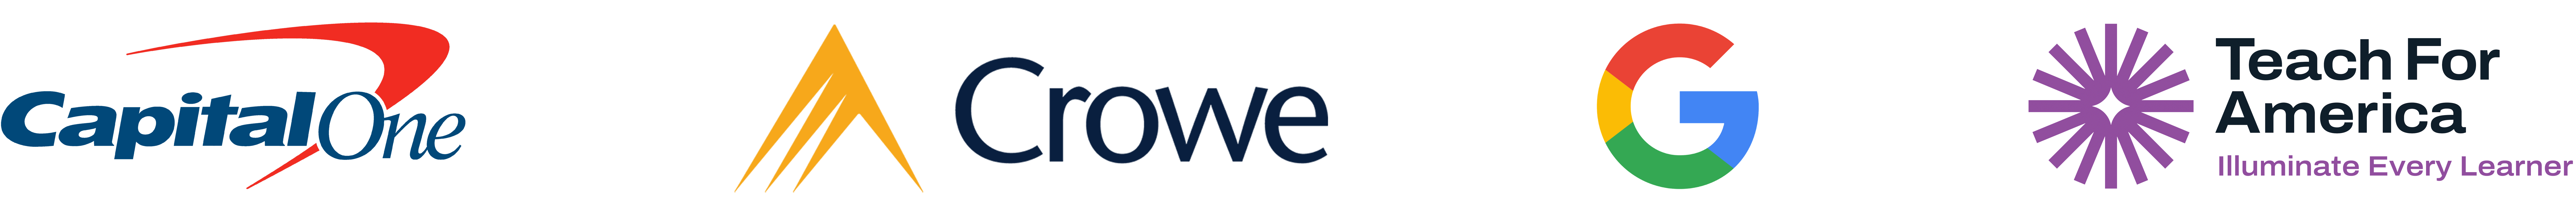 Logos for Capital One, Crowe LLP, Teach for America, and Google